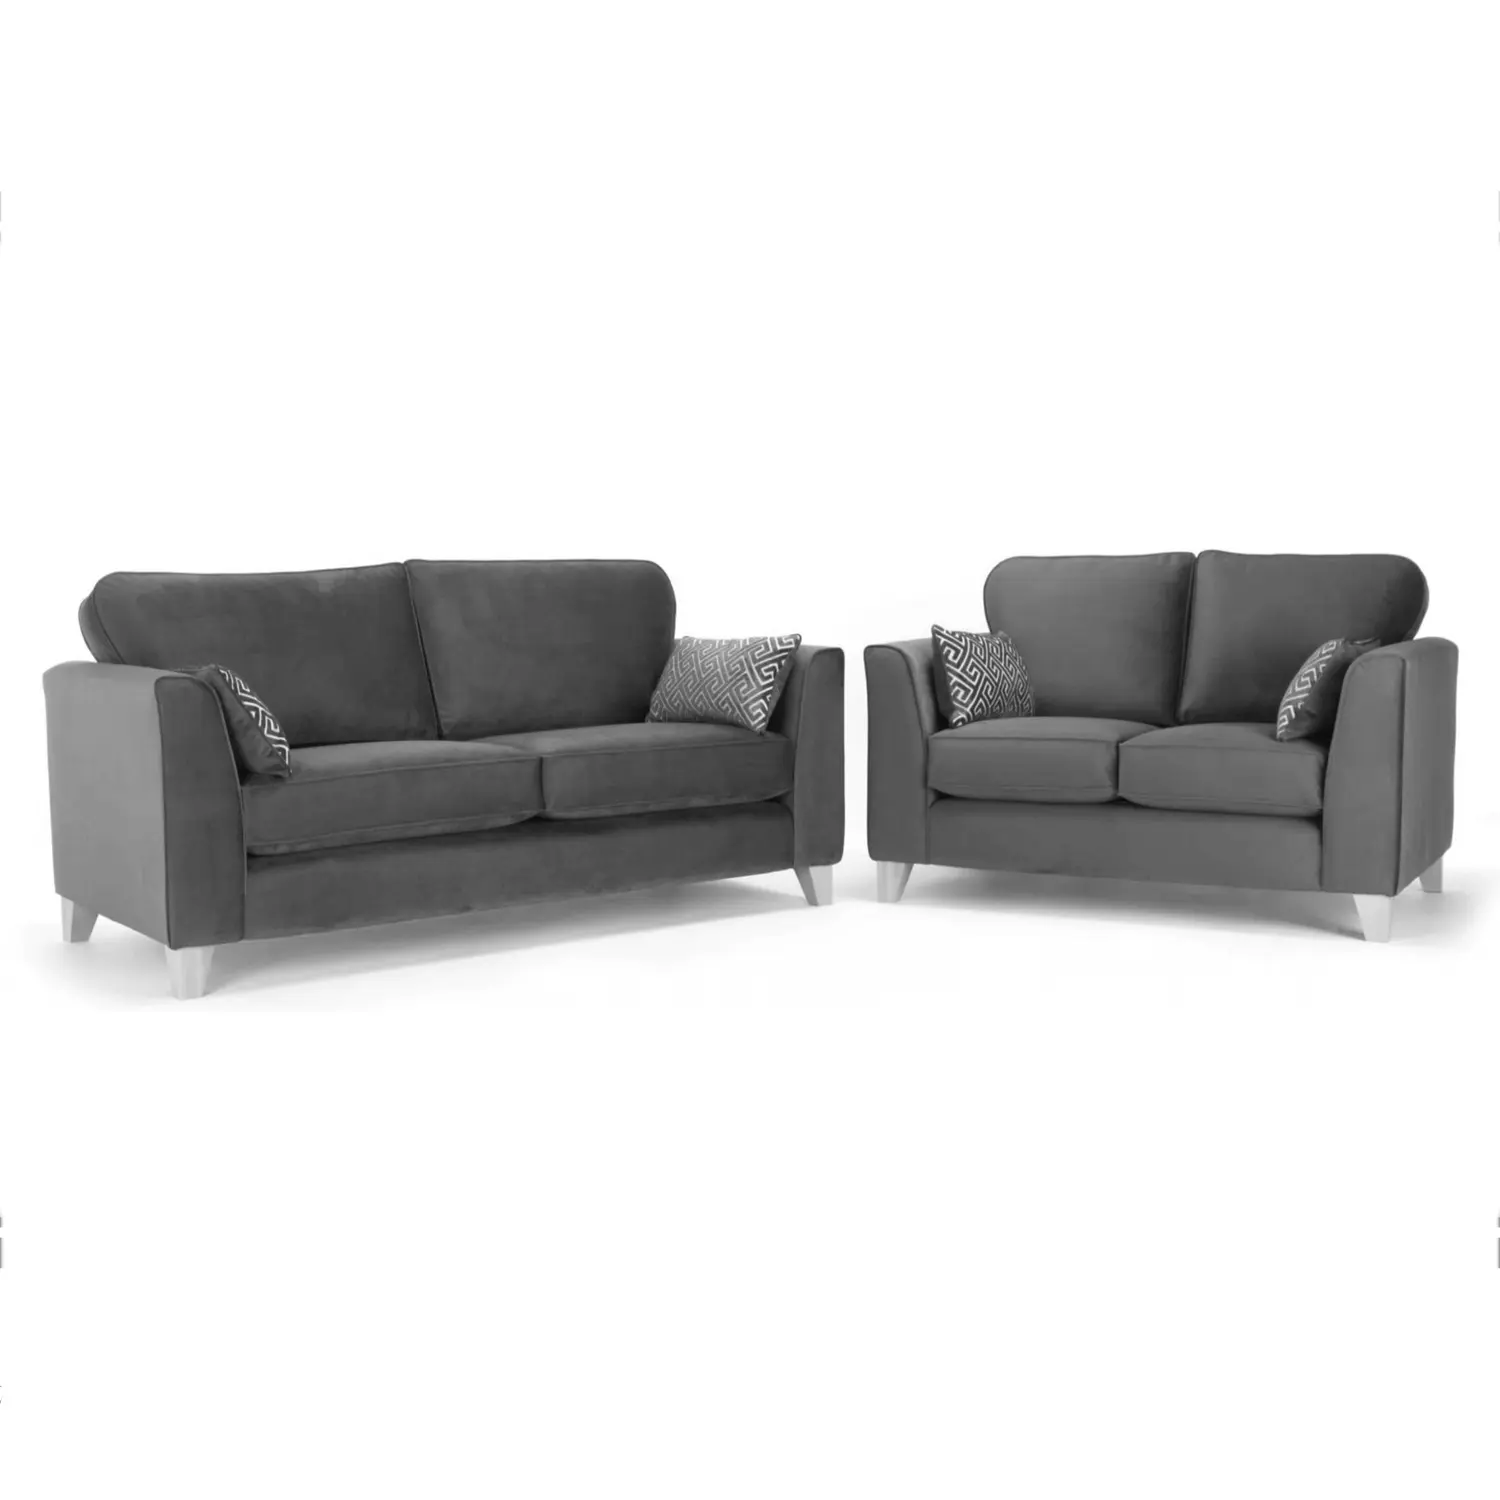 Taxfree Contemporary Modern Living Room Furniture Sofa Set London furniture sofa set in living room turkish sofa set furniture